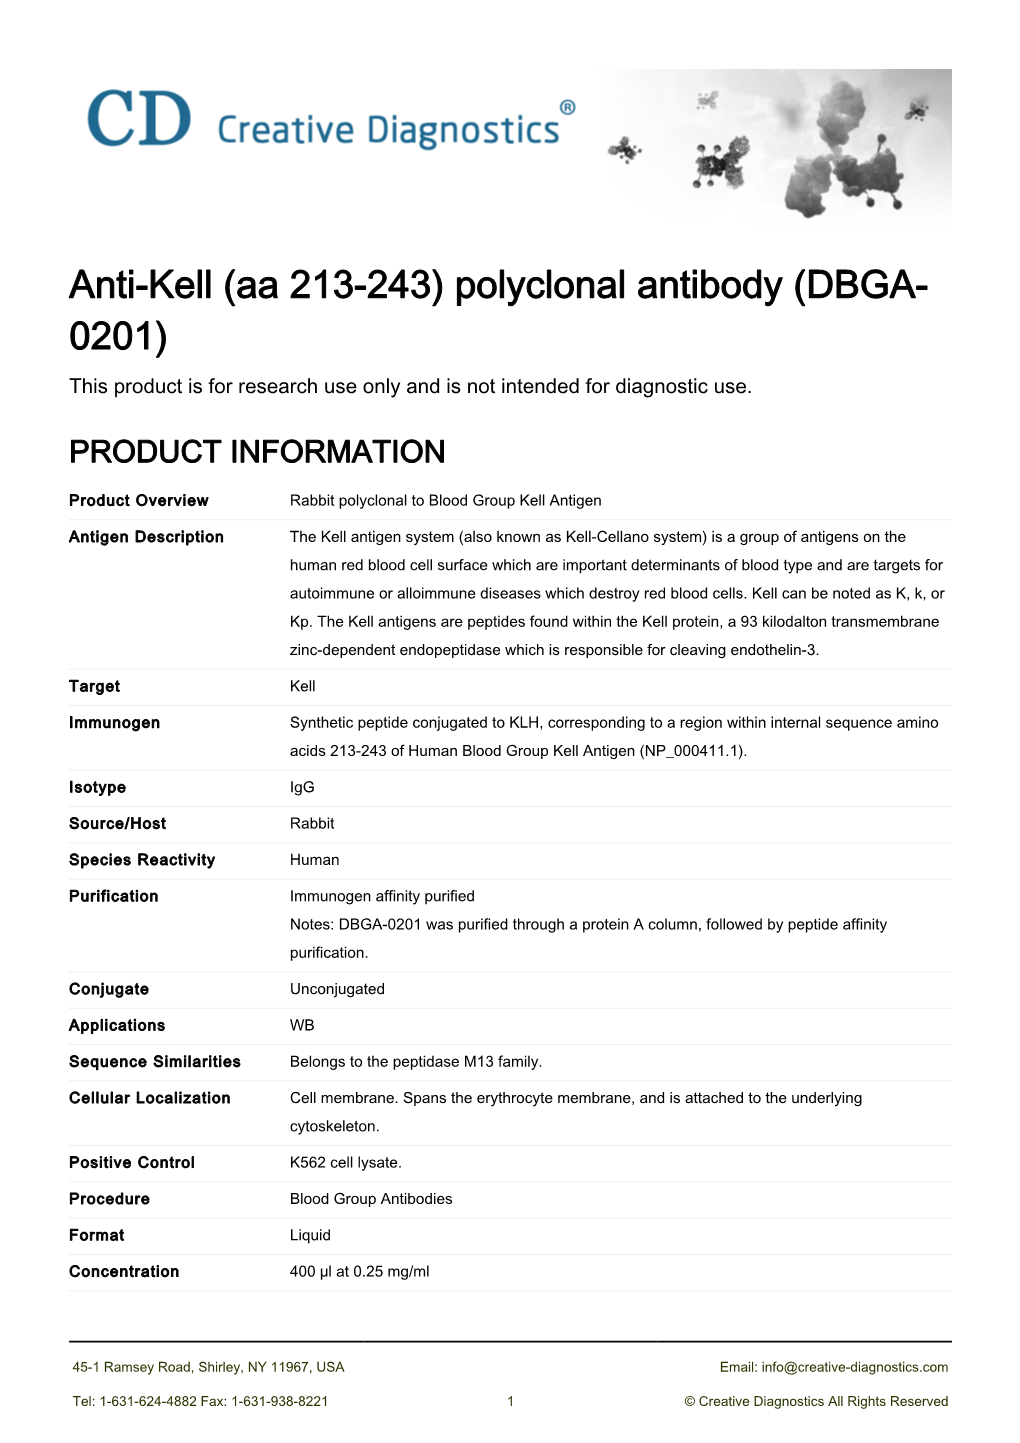 Anti-Kell (Aa 213-243) Polyclonal Antibody (DBGA- 0201) This Product Is for Research Use Only and Is Not Intended for Diagnostic Use